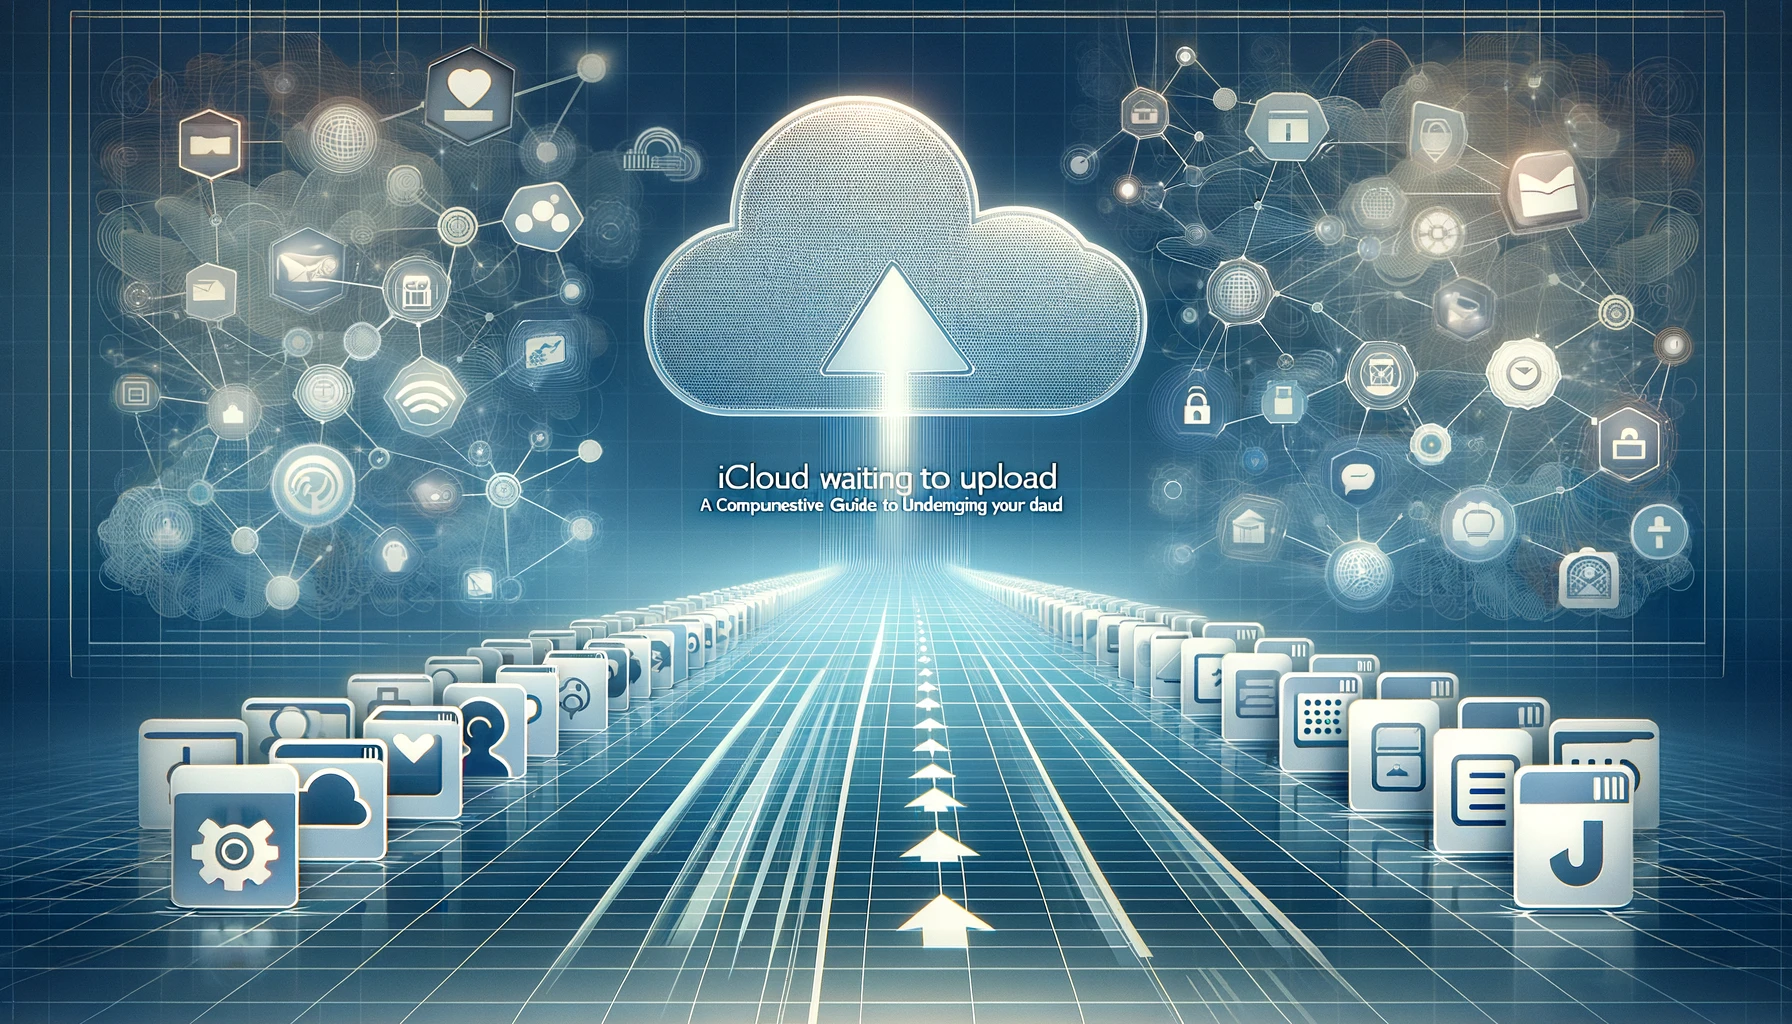 iCloud Waiting to Upload: A Comprehensive Guide to Understanding and Managing Your Data